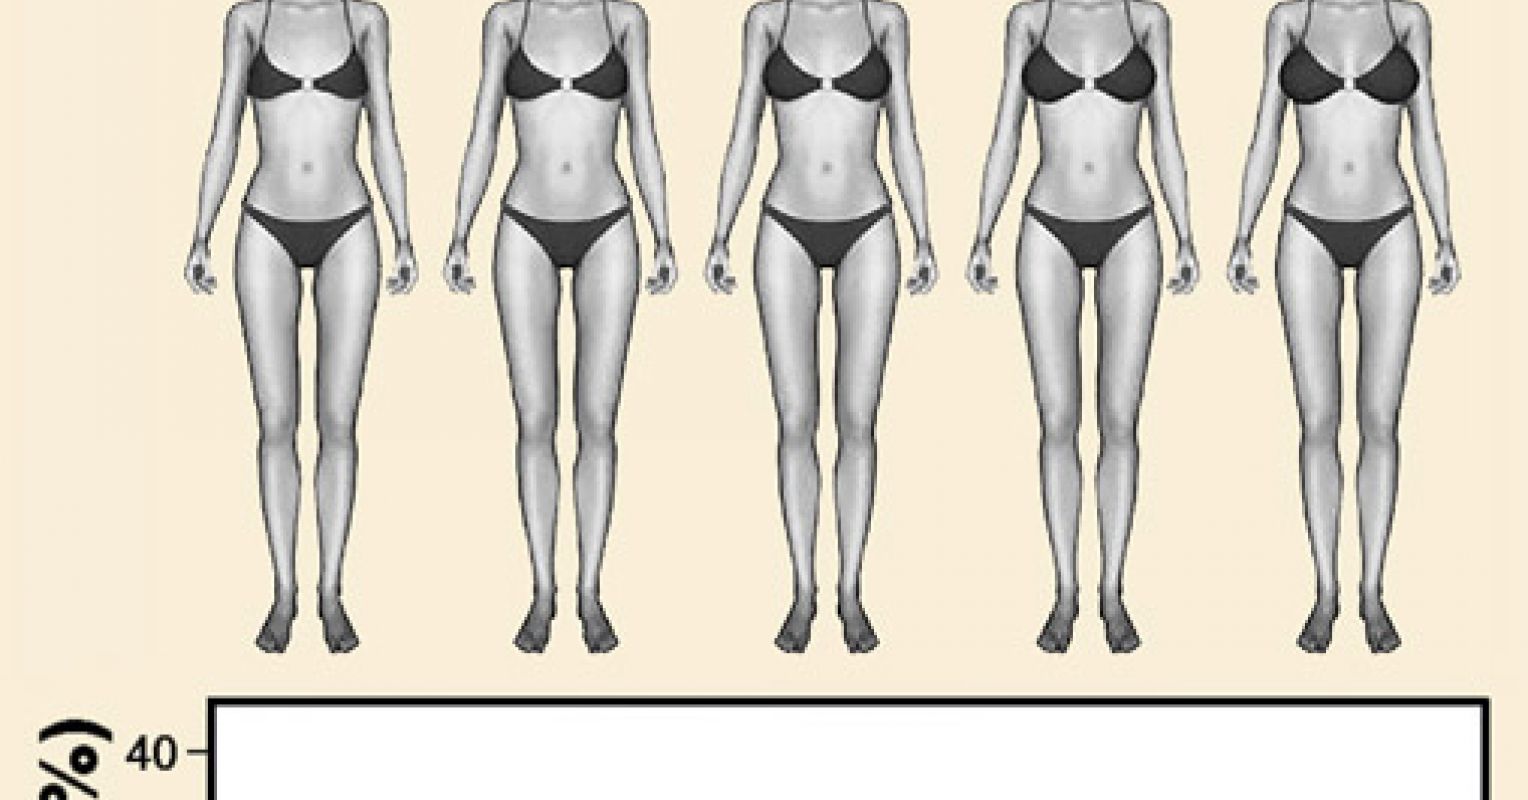 Just How Important Is Breast Size in Attraction? Psychology Today